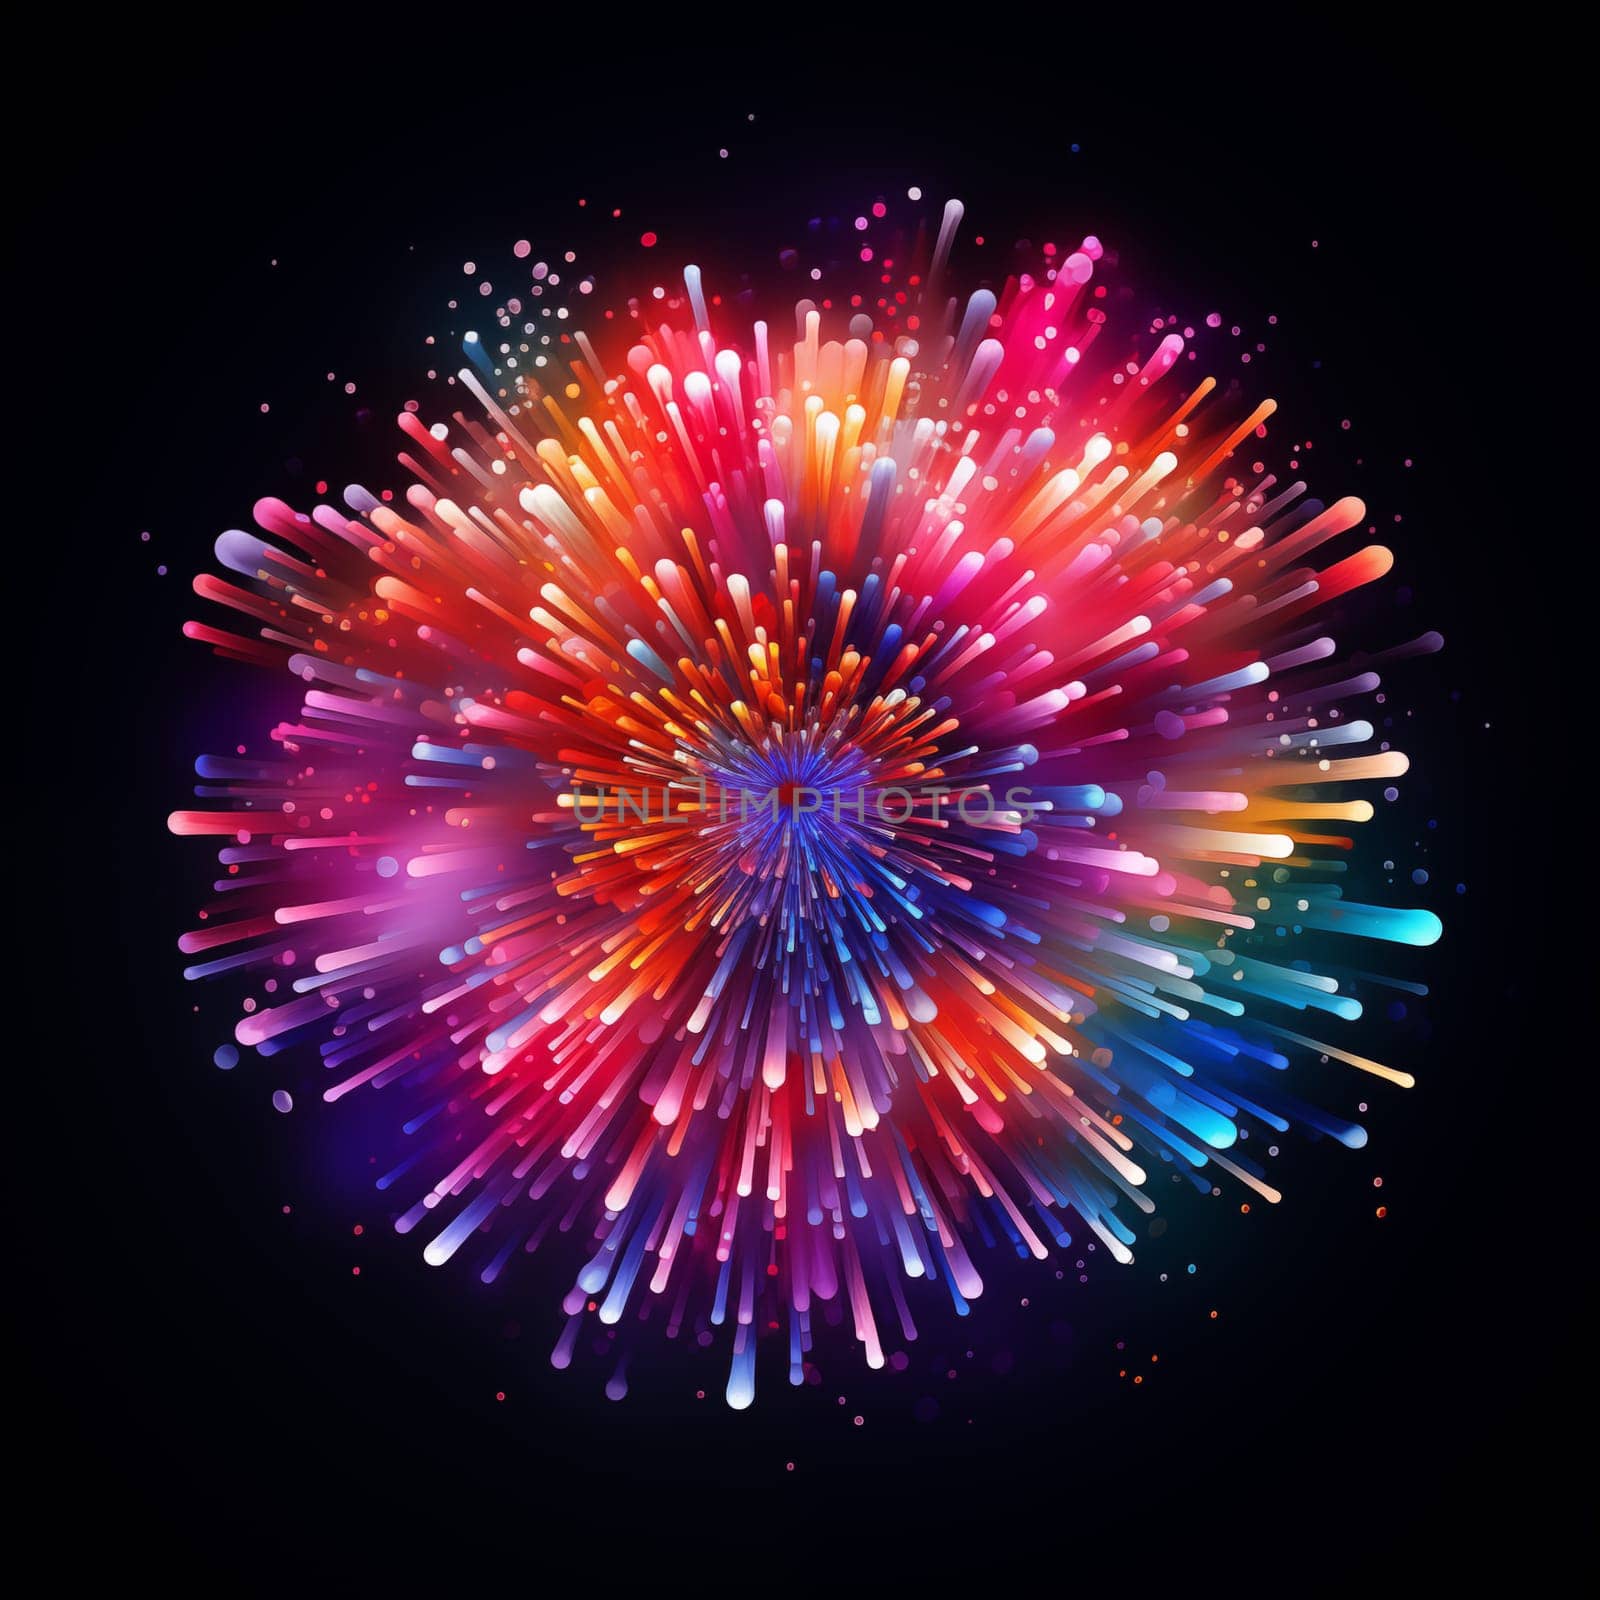 One colorful fireworks on black background isolated.